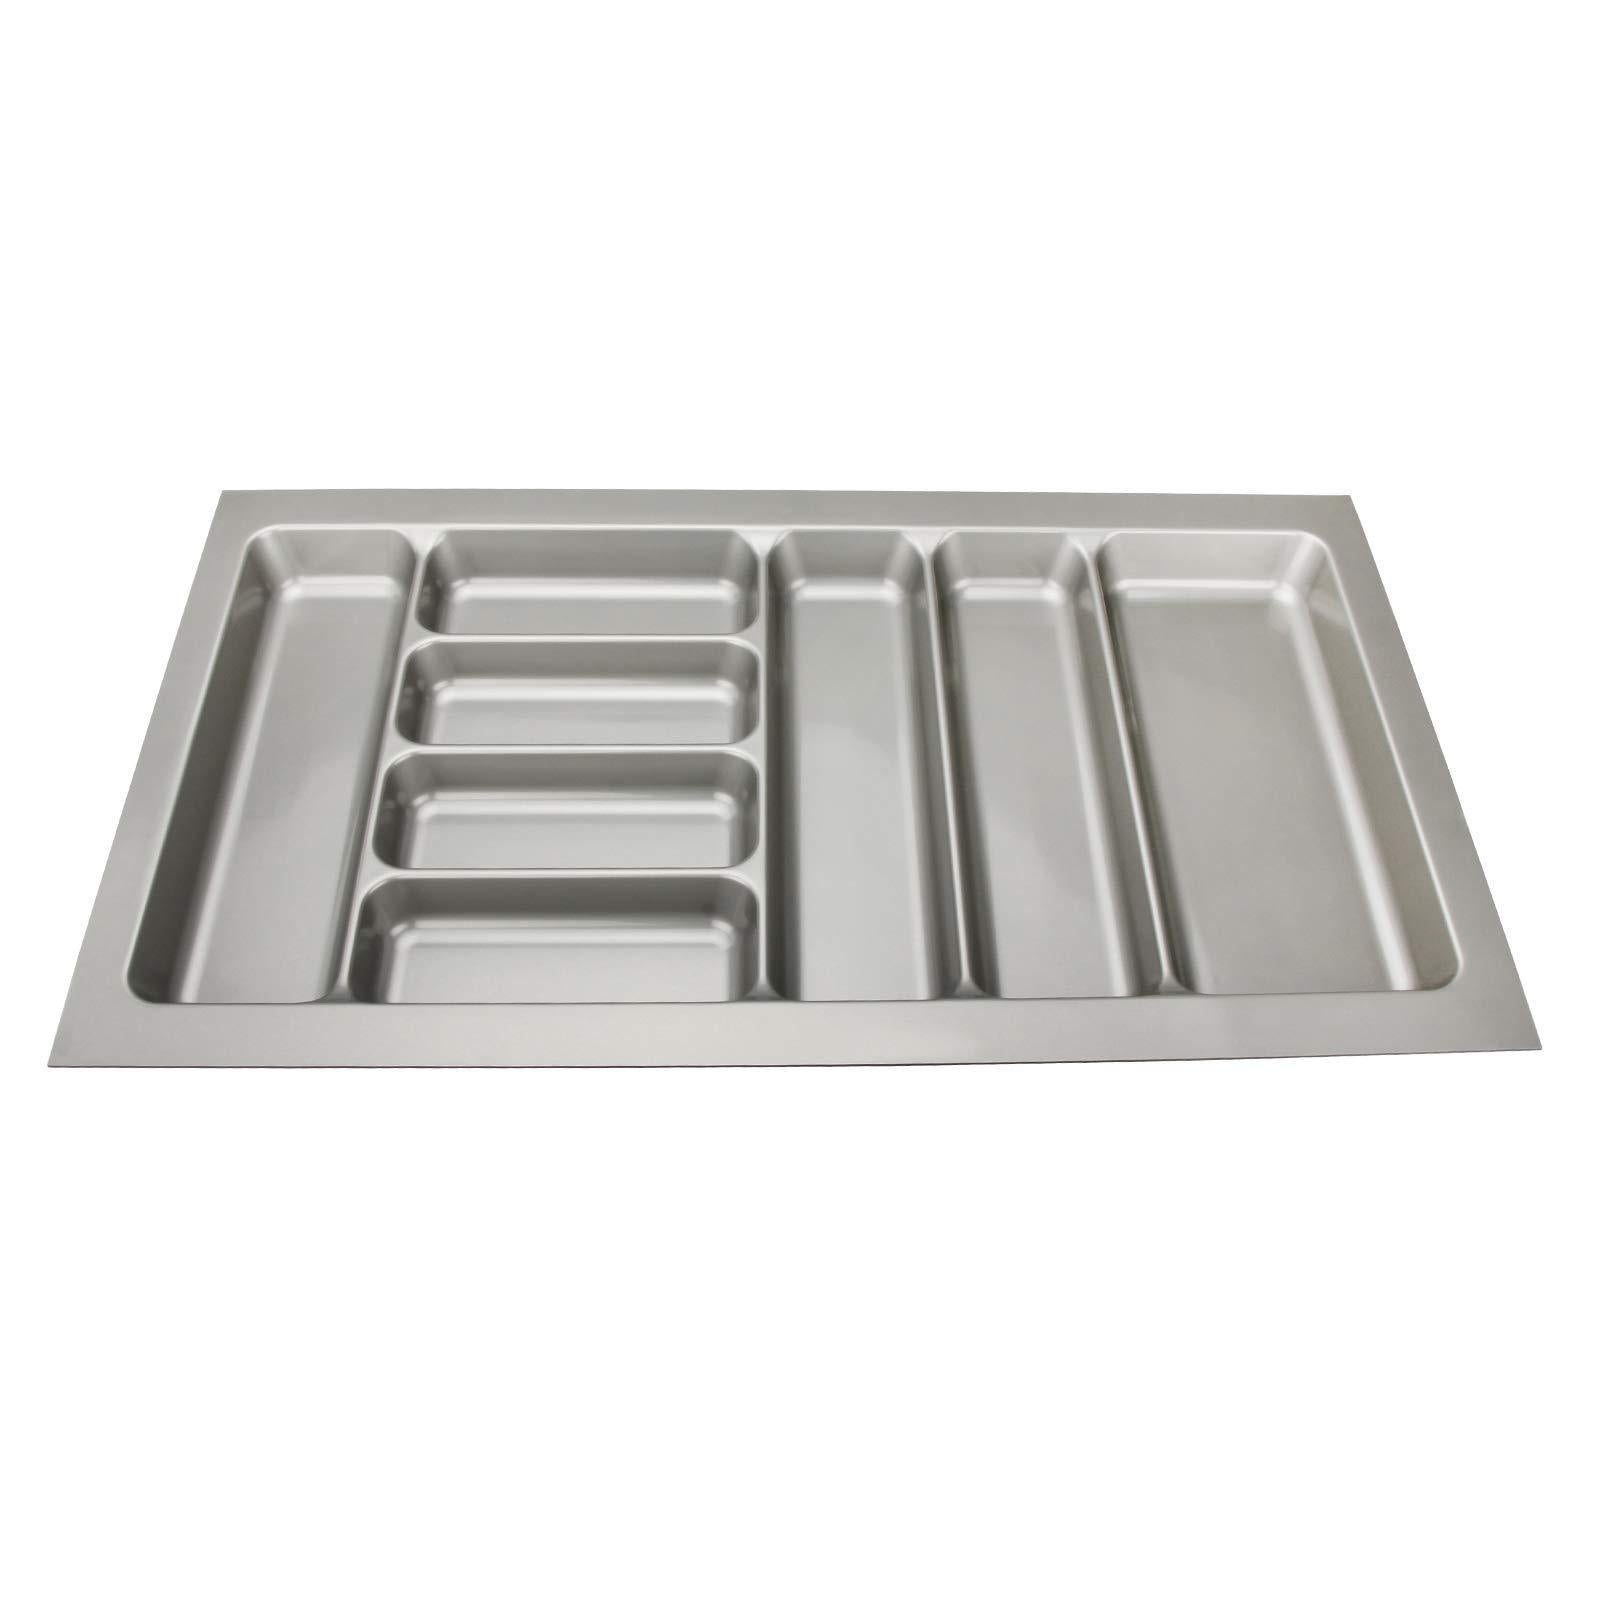 Best 8 compartments cutlery tray insert utensil drawer divider organiser 900mm width cabinet abs plastic gray adjustable